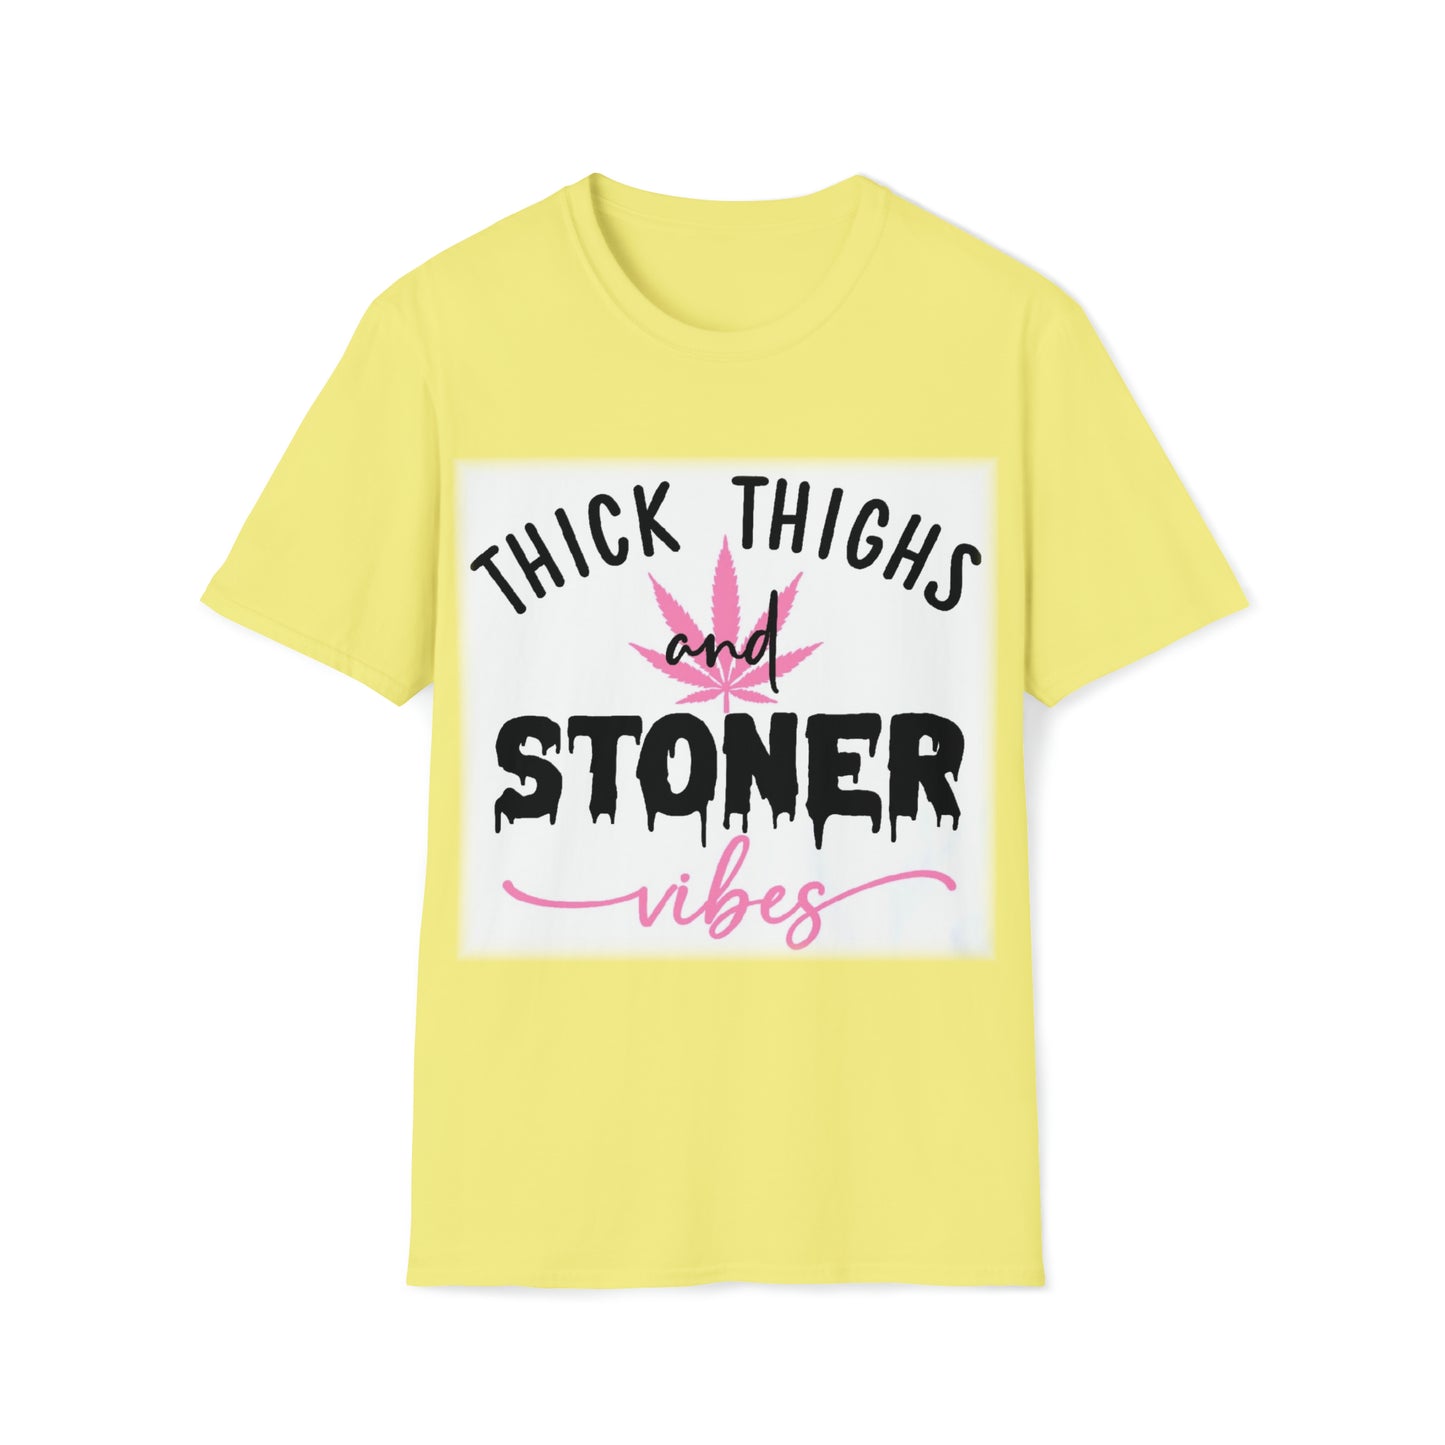 Thighs Vibes Tee